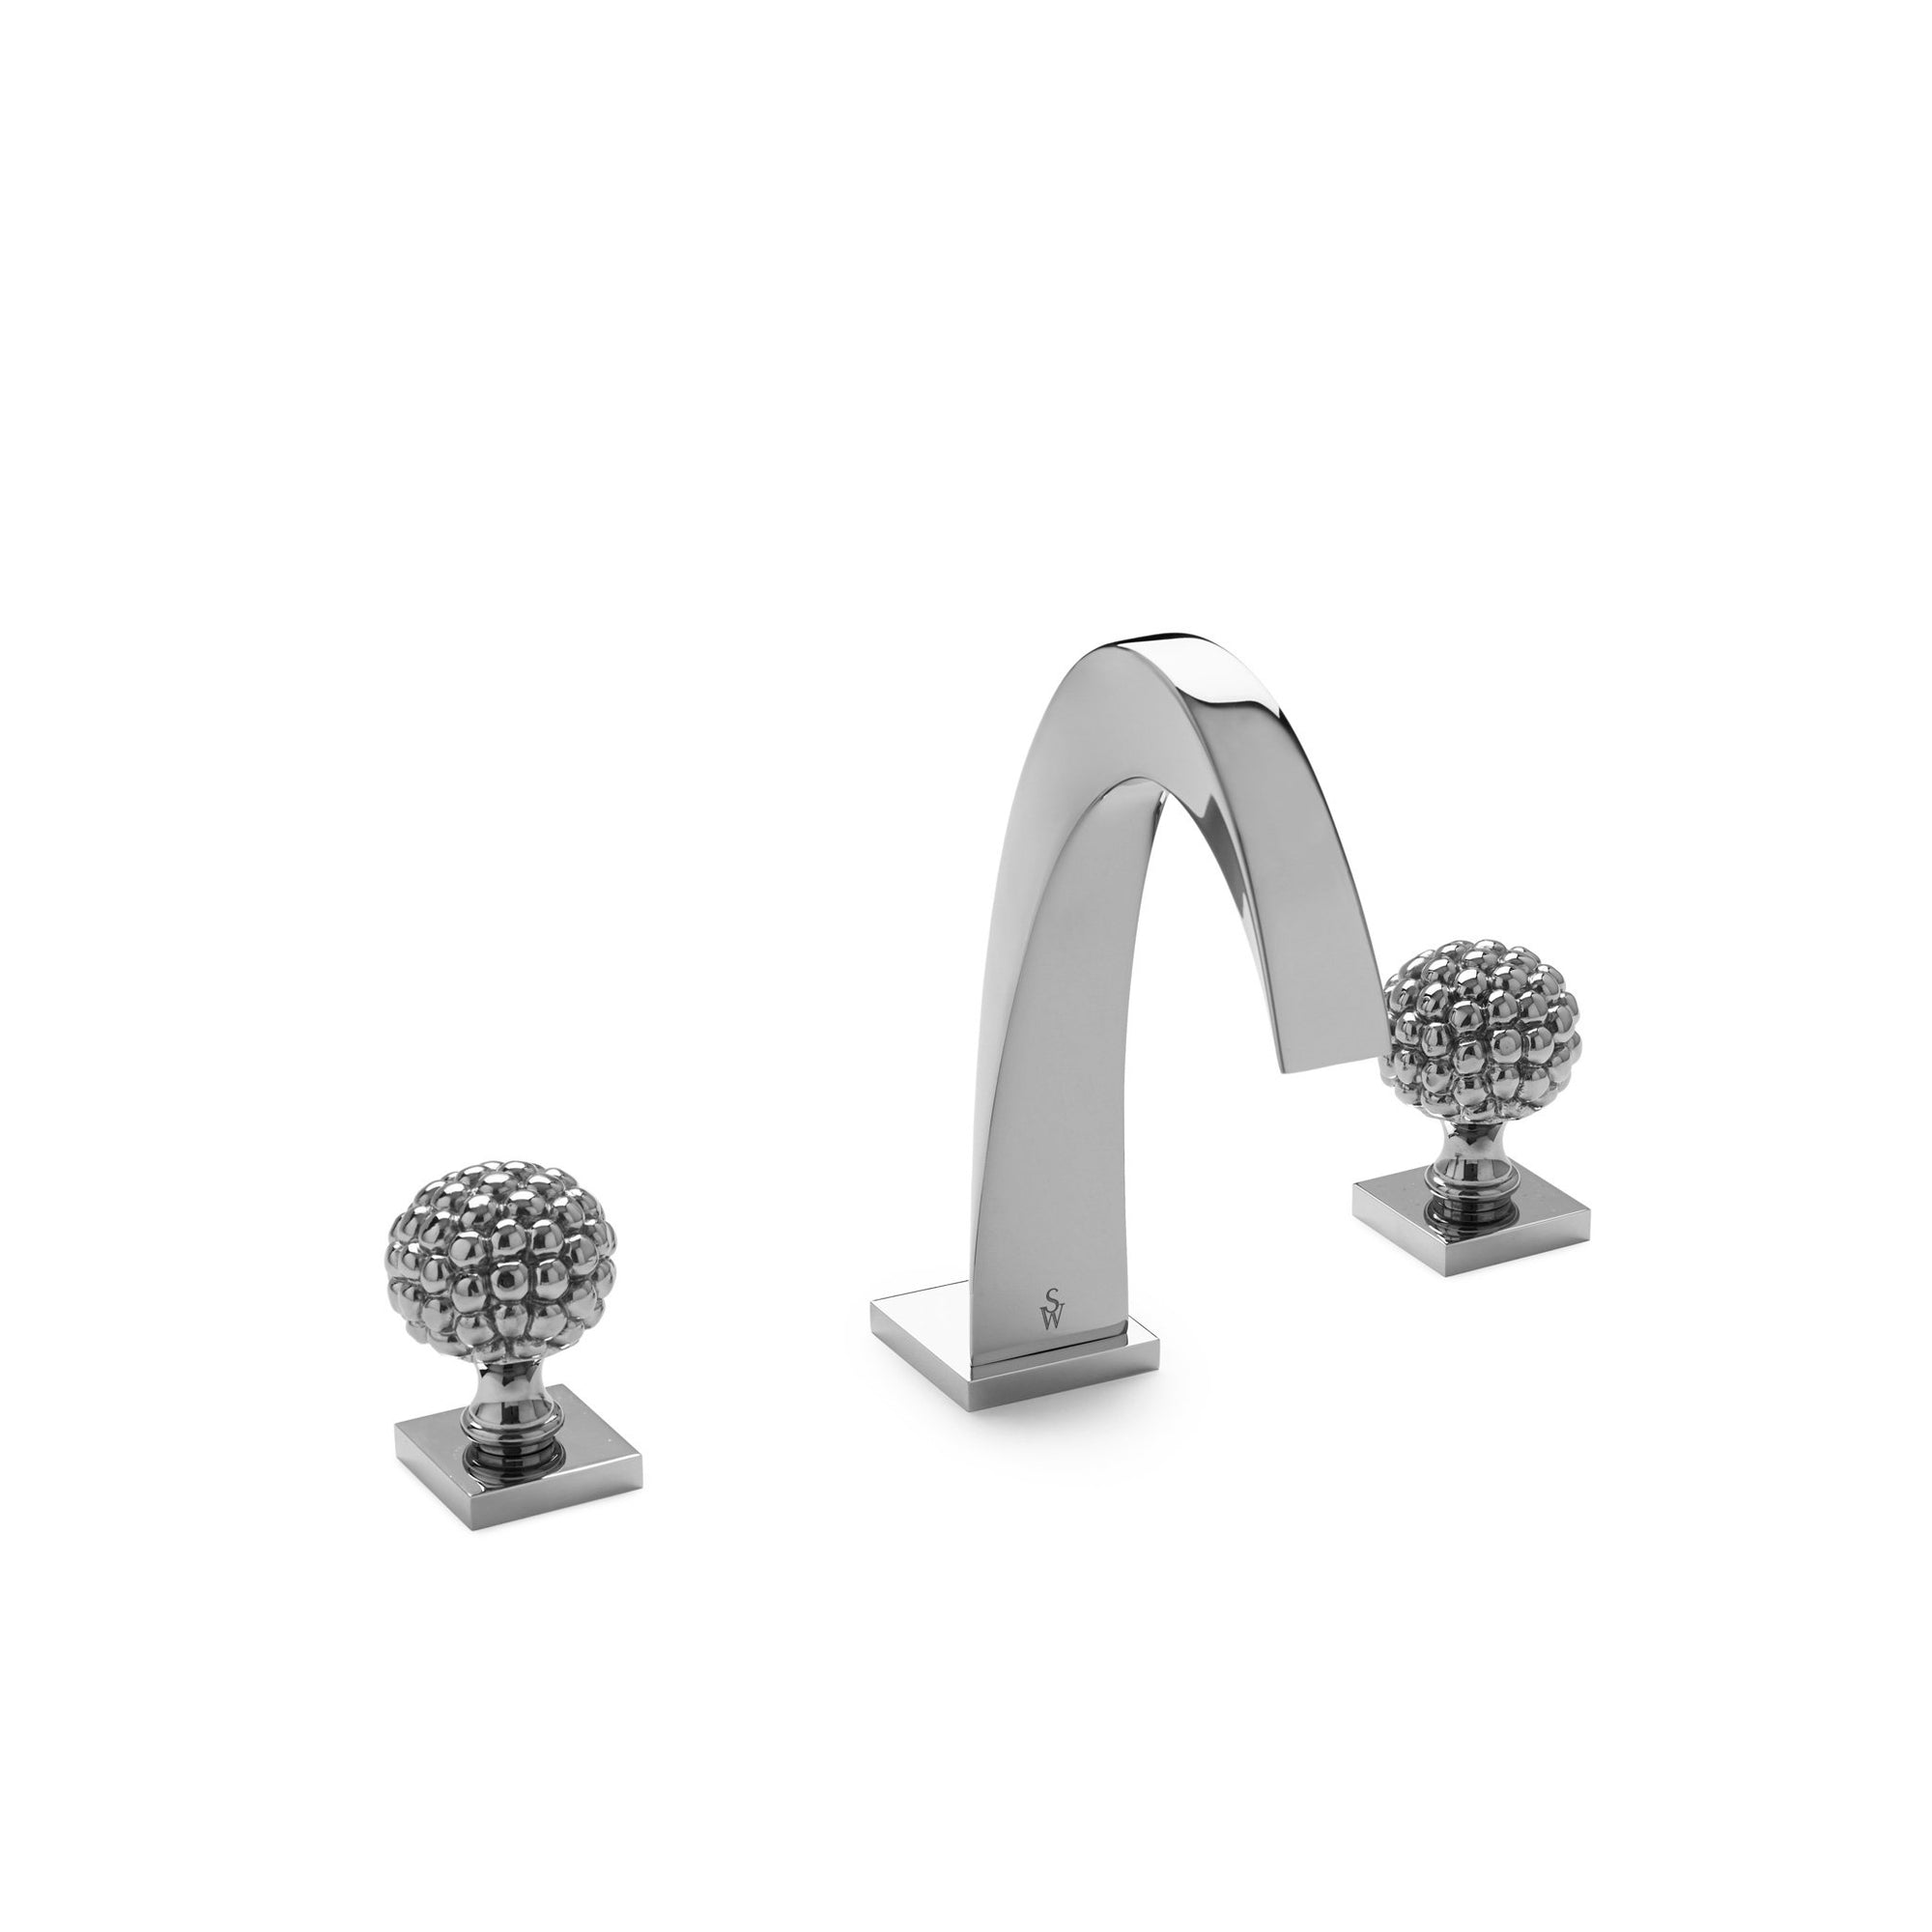 1083BSN108-CP Sherle Wagner International Arco with Berry Knob Faucet Set in Polished Chrome metal finish